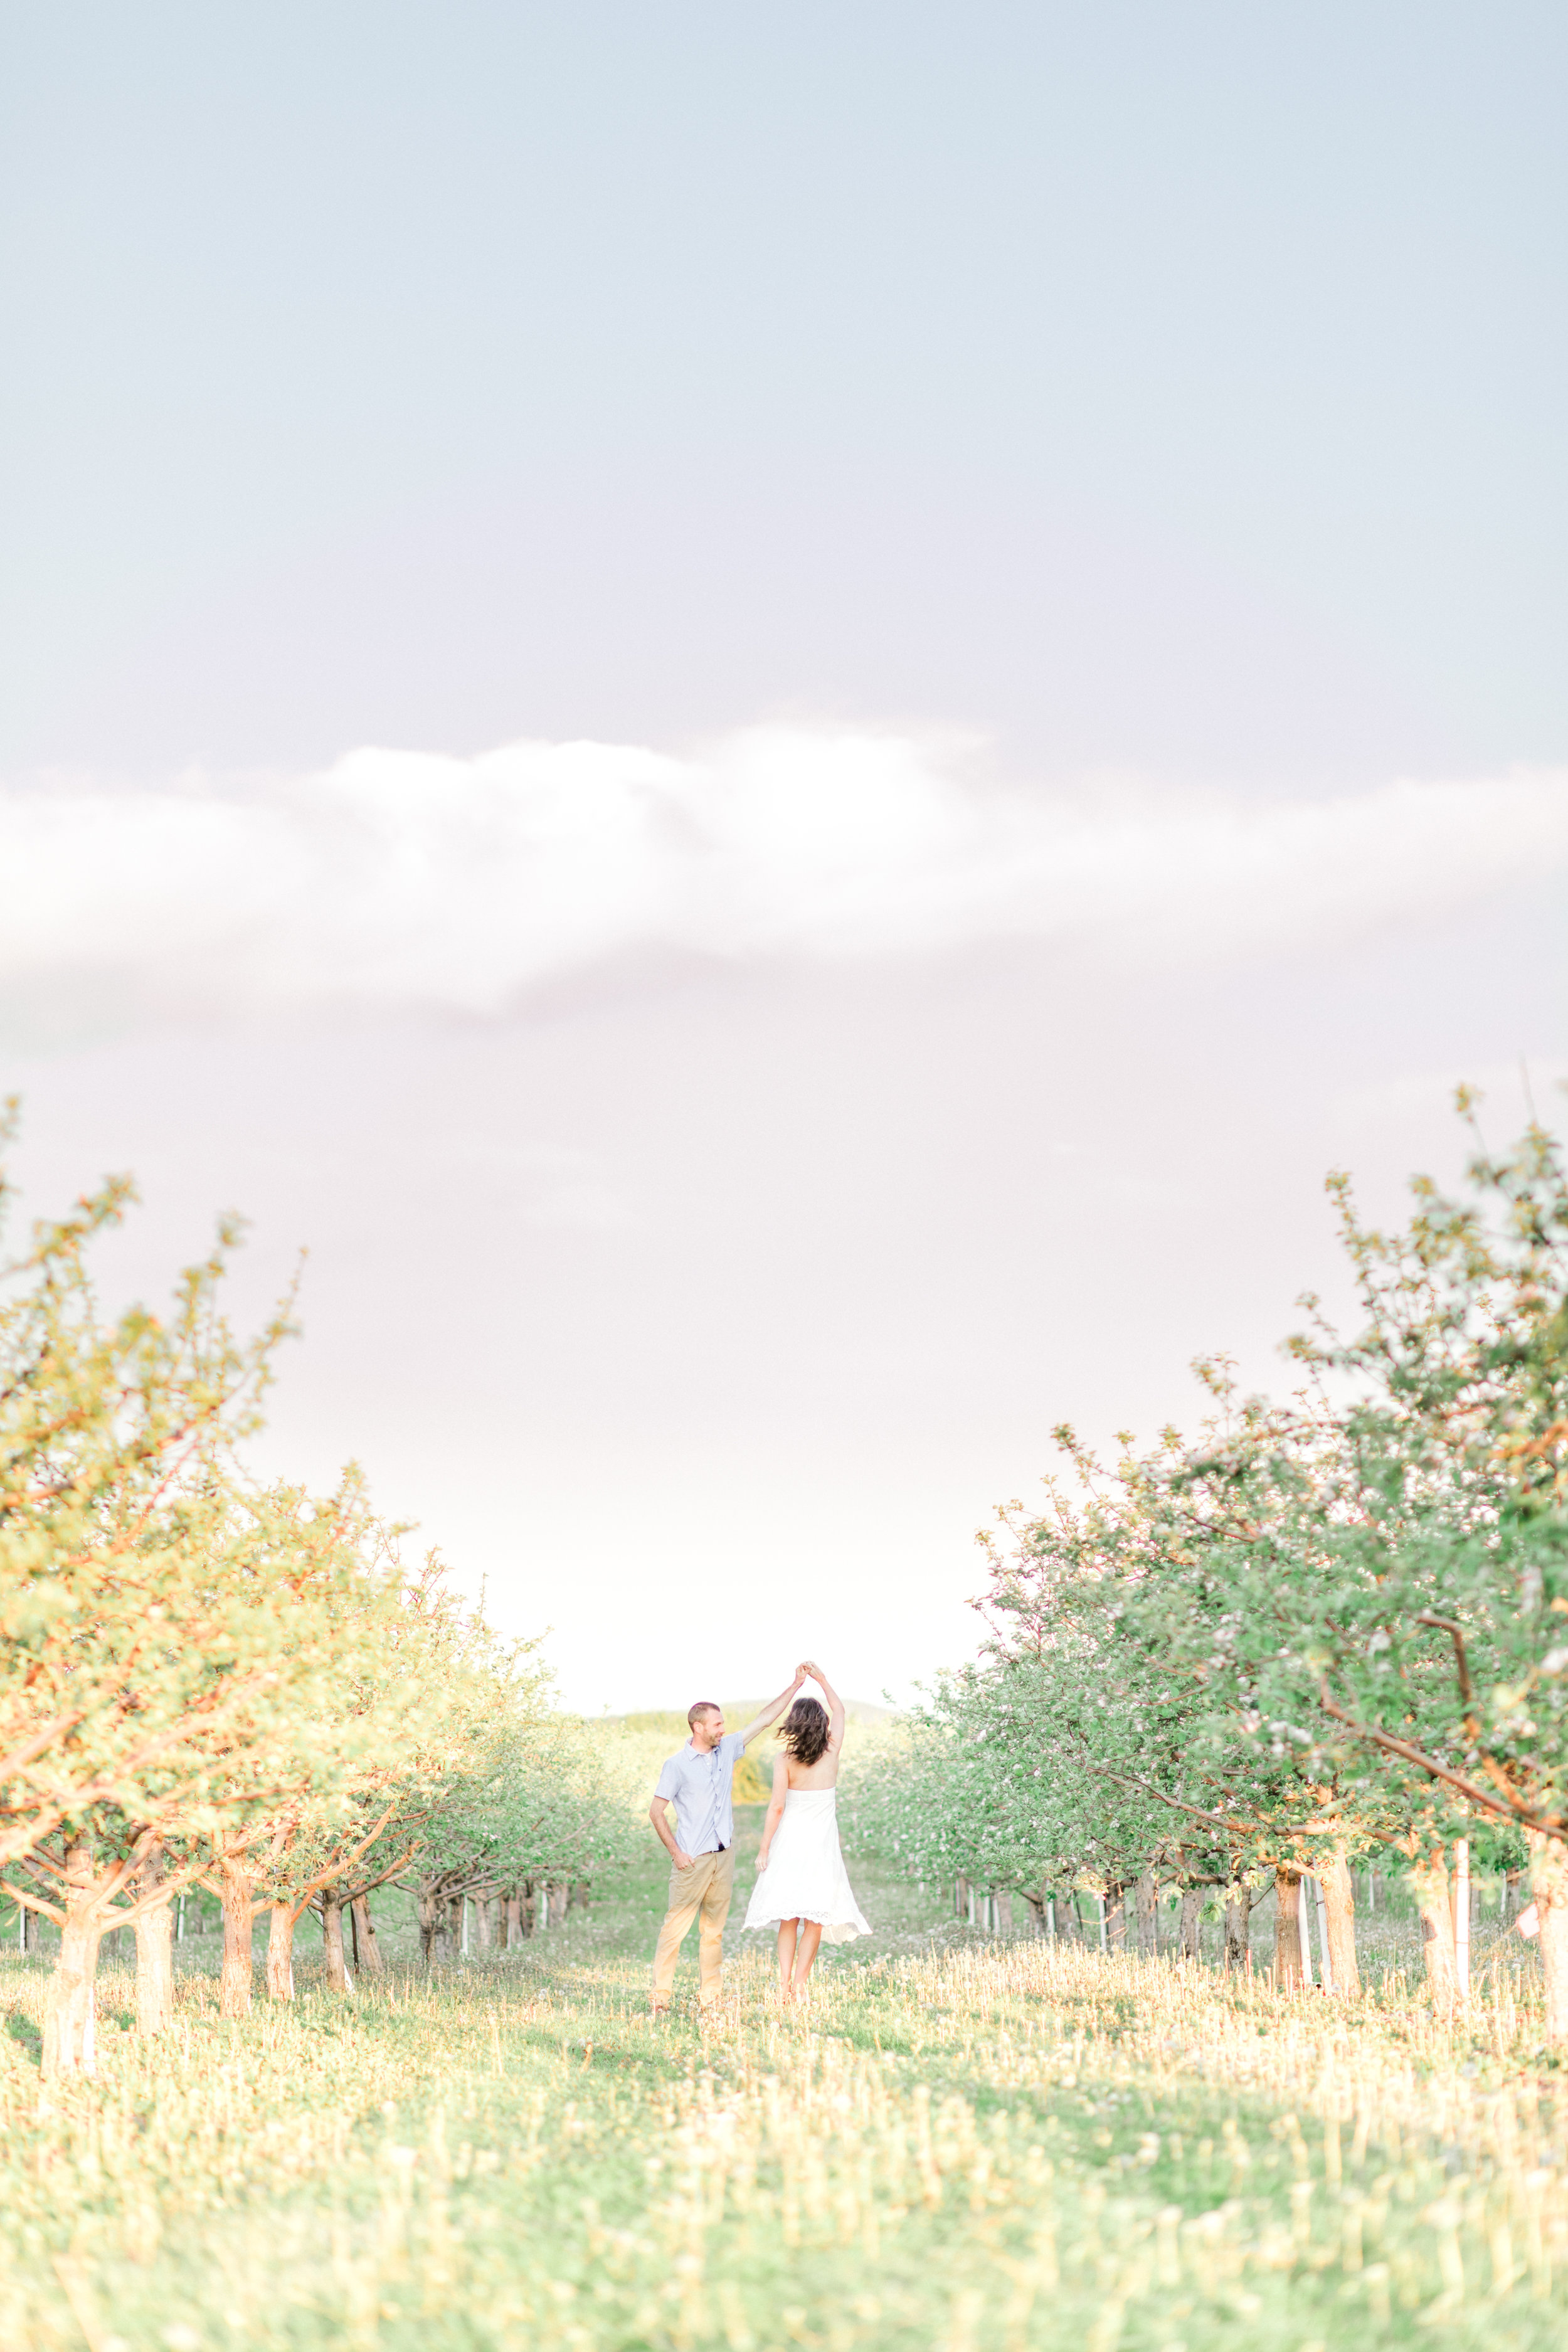 Engagement pictures should be romantic and fun! This golden glow session was jus that. Apple blossom engagement pictures in white dress for outfit ideas.Sunrise orchard engagement photo ideas with flower blossoms.